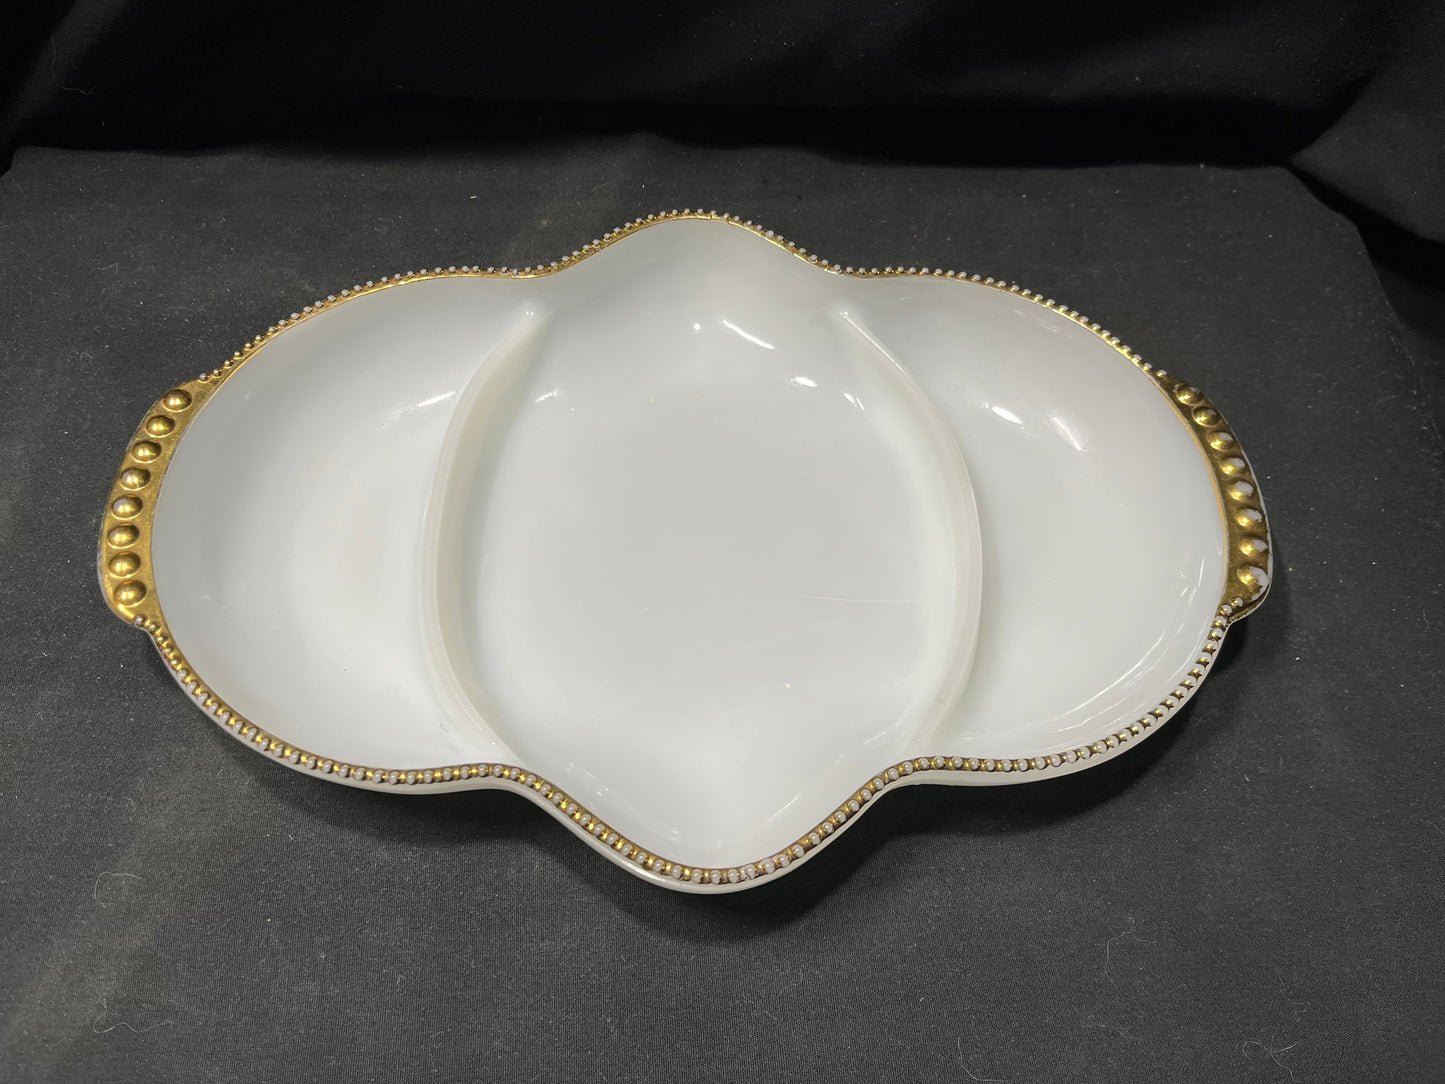 Fire King Milk Glass Divided Server with Gold Trim